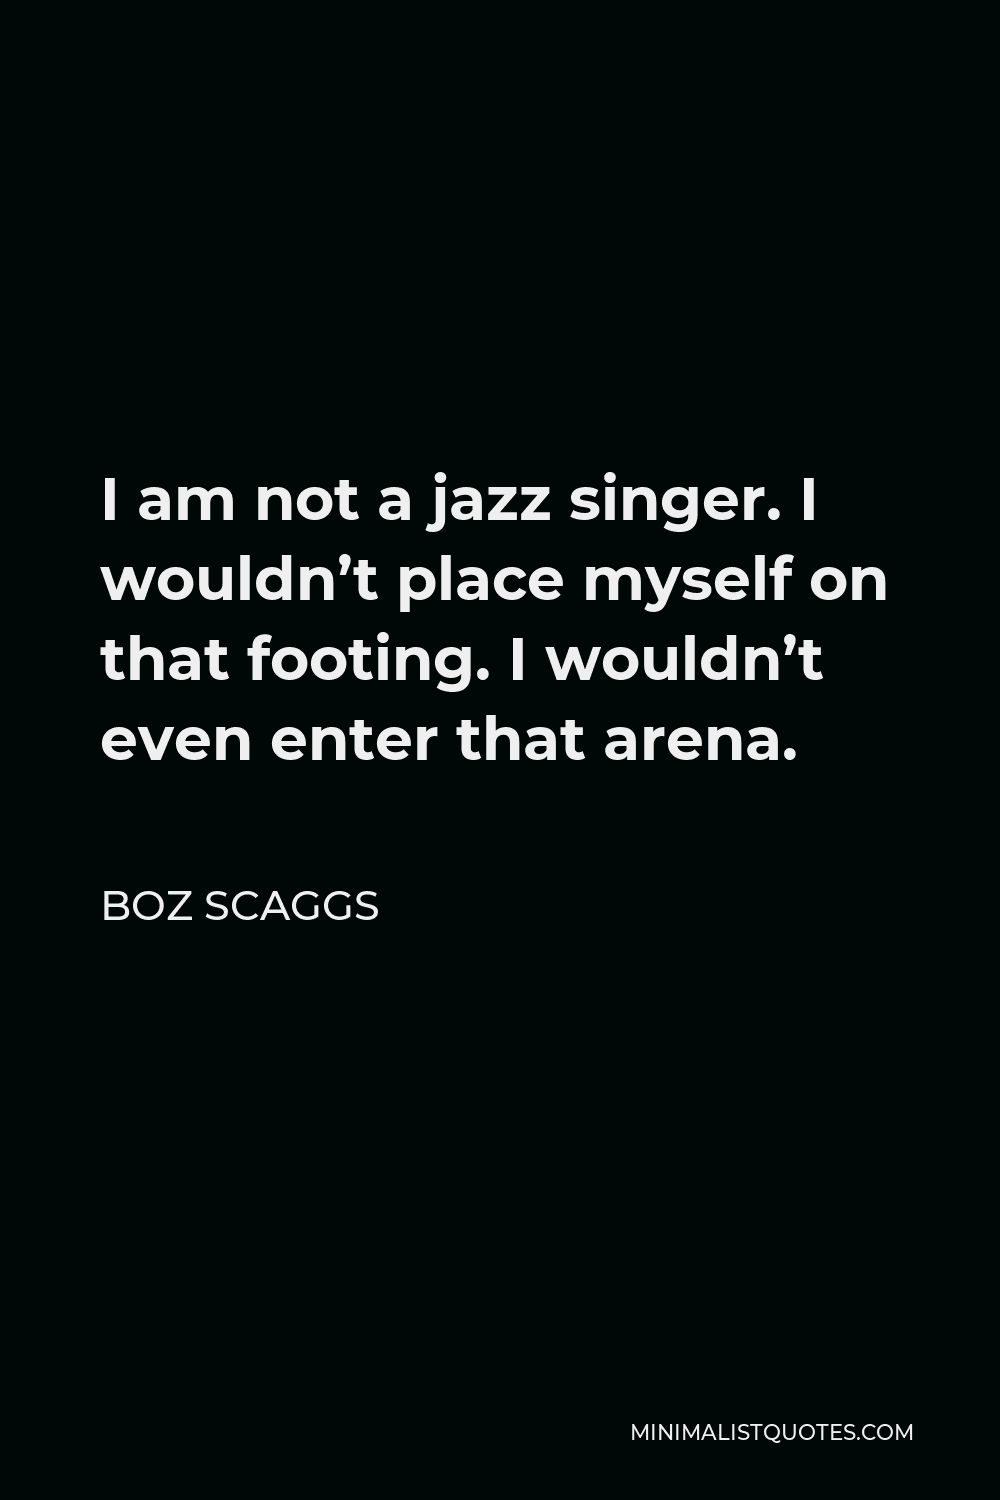 Boz Scaggs Quote - I am not a jazz singer. I wouldn’t place myself on that footing. I wouldn’t even enter that arena.